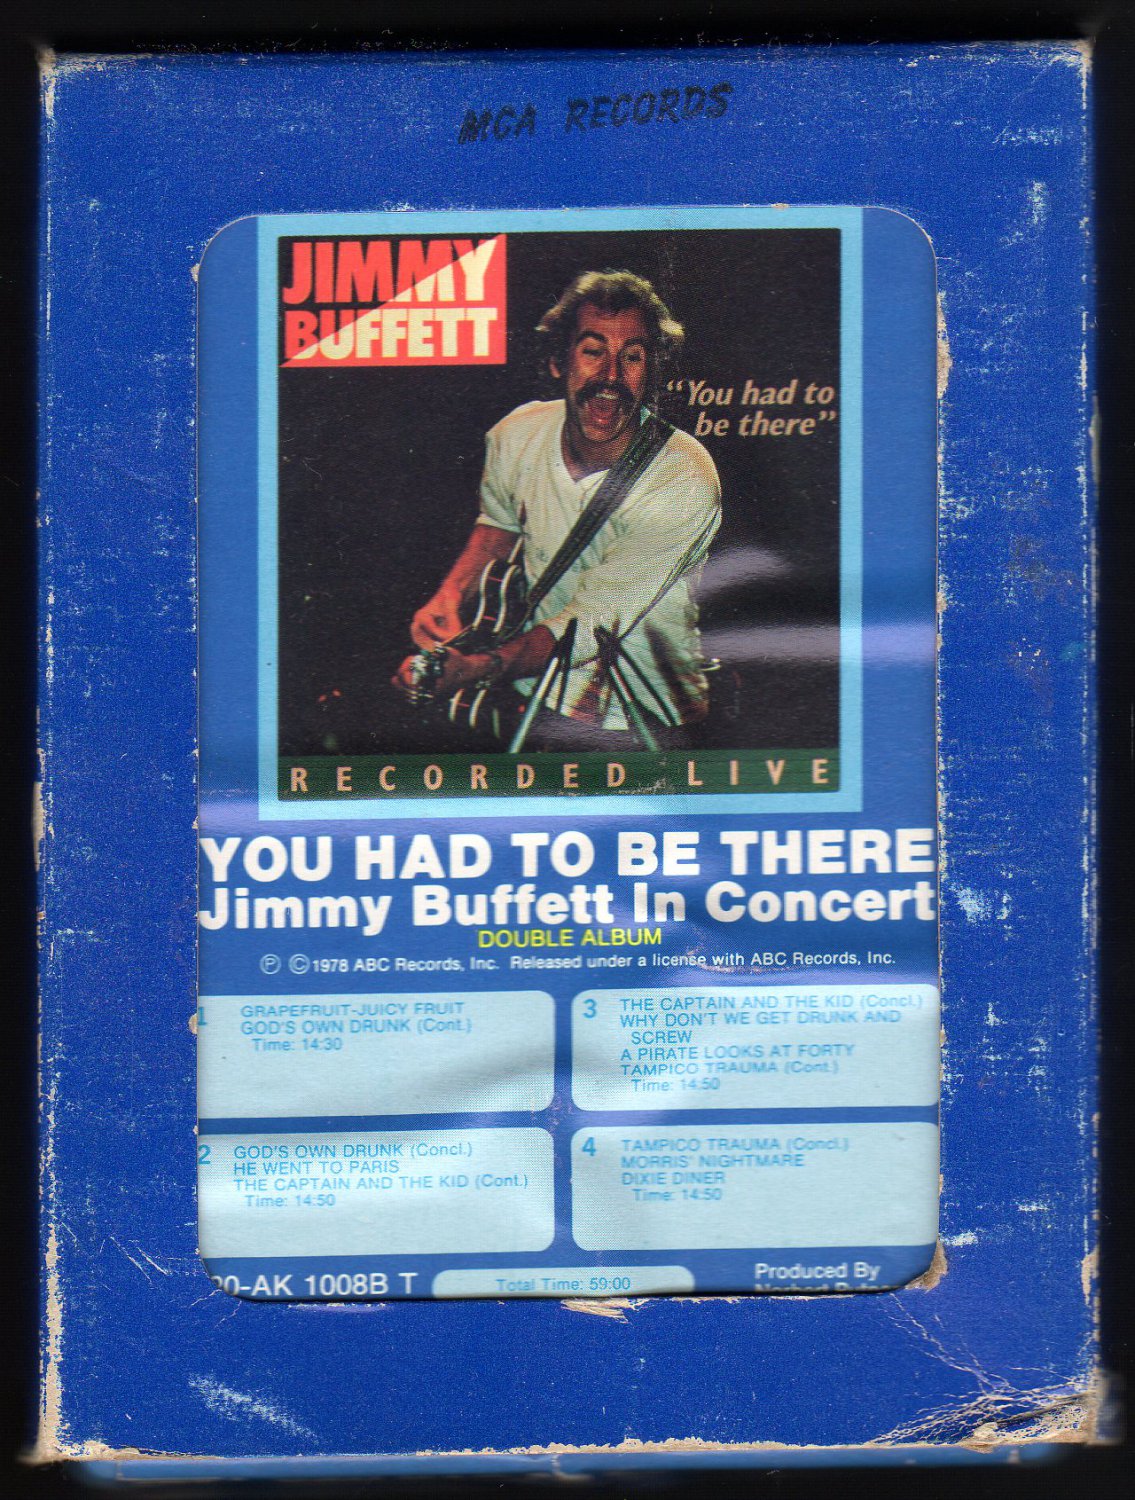 Jimmy Buffett - You Had To Be There LIVE 1978 GRT MCA Double Album A41 8-TRACK TAPE